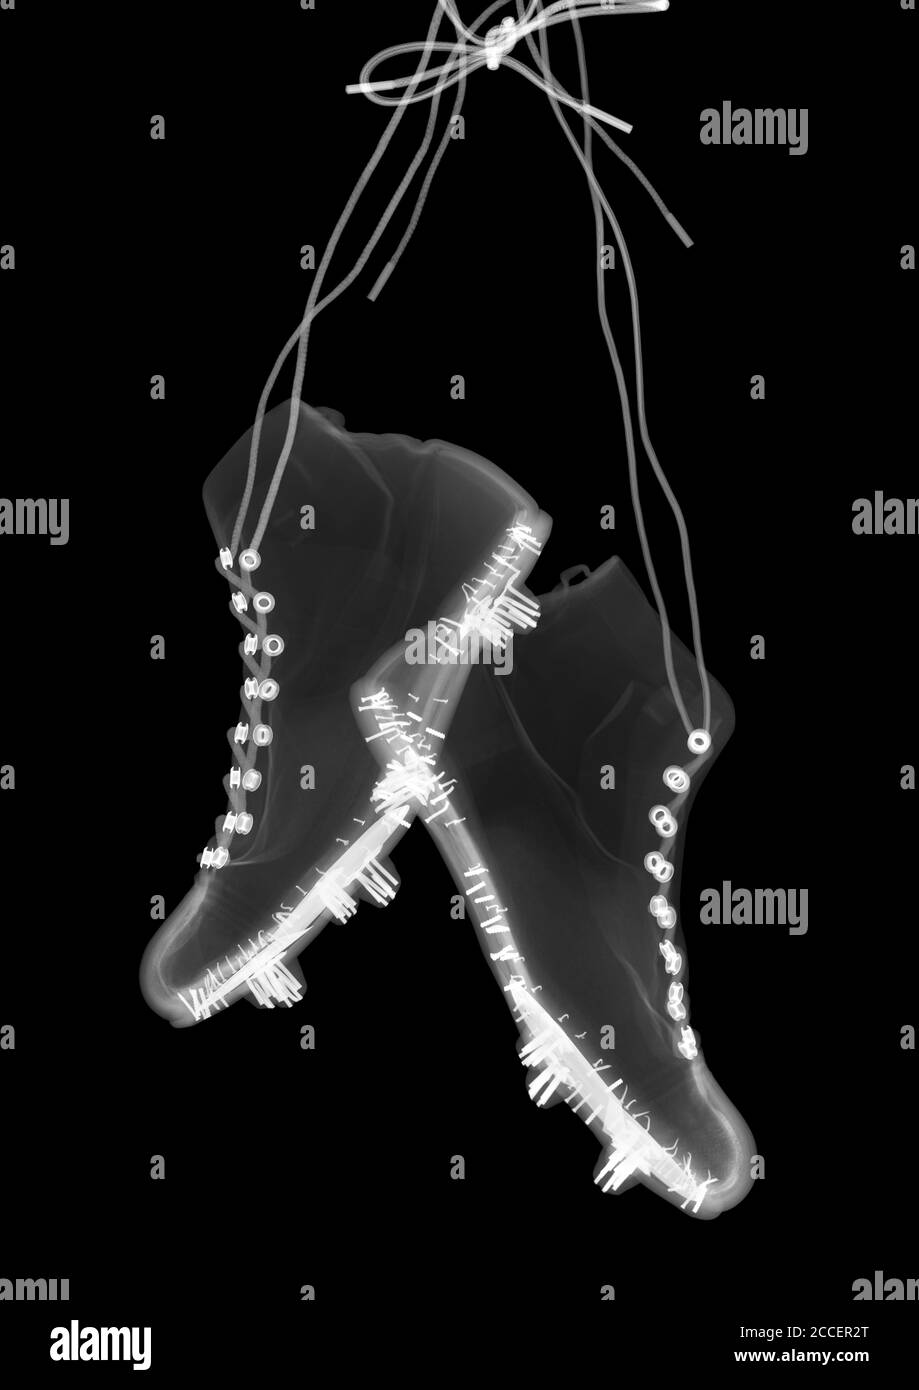 Football boot Black and White Stock Photos & Images - Alamy